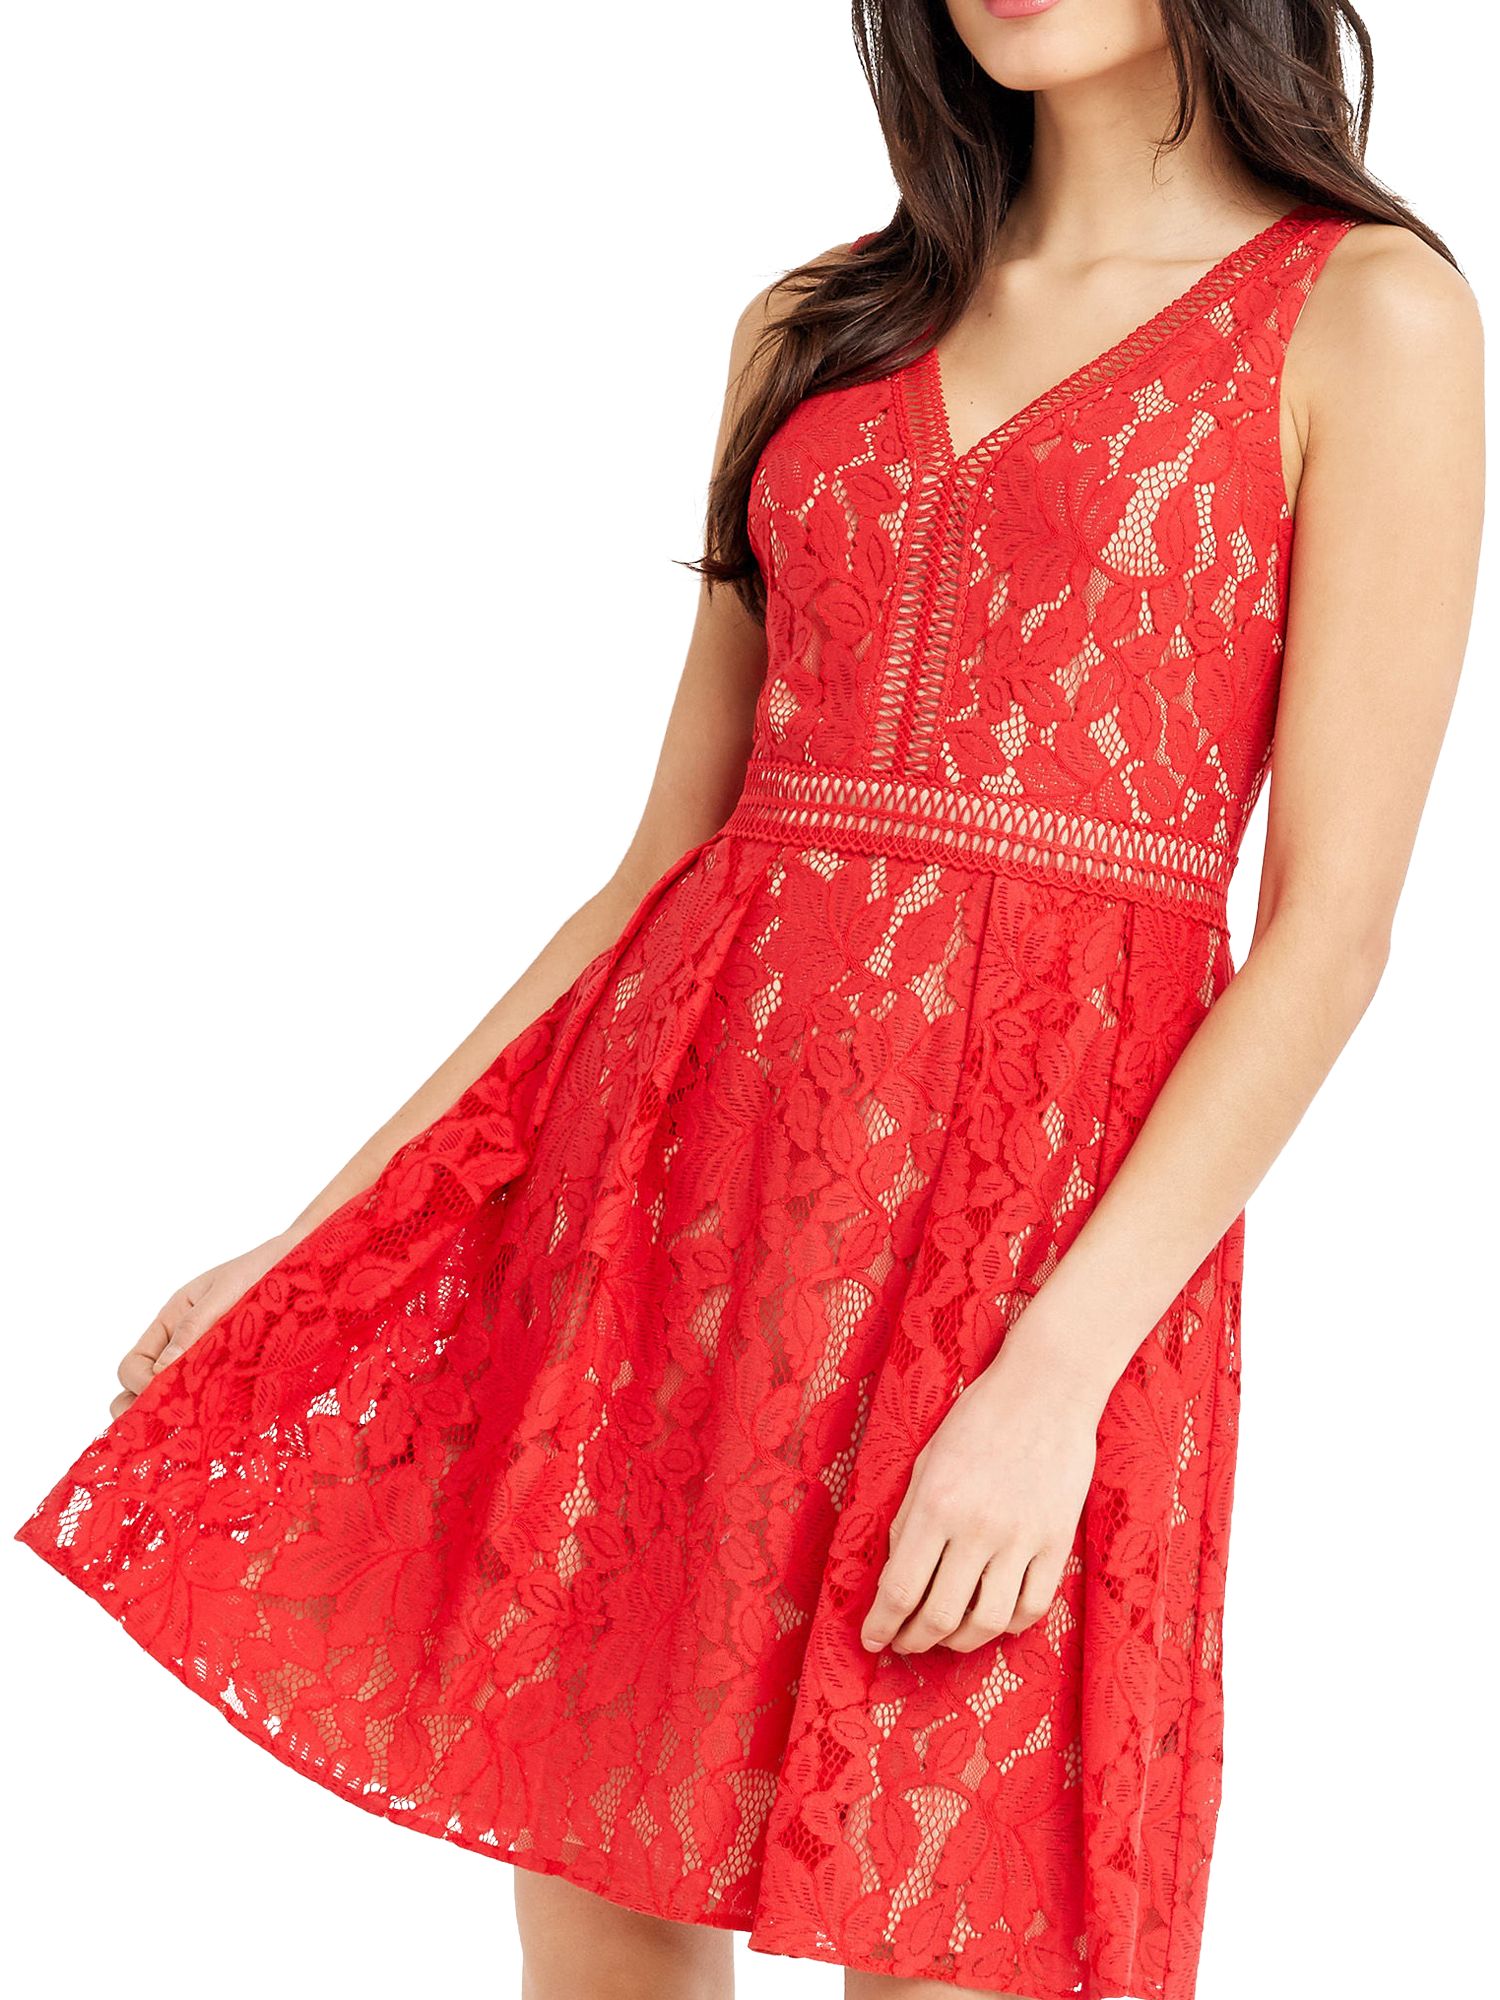 oasis red lace skater dress